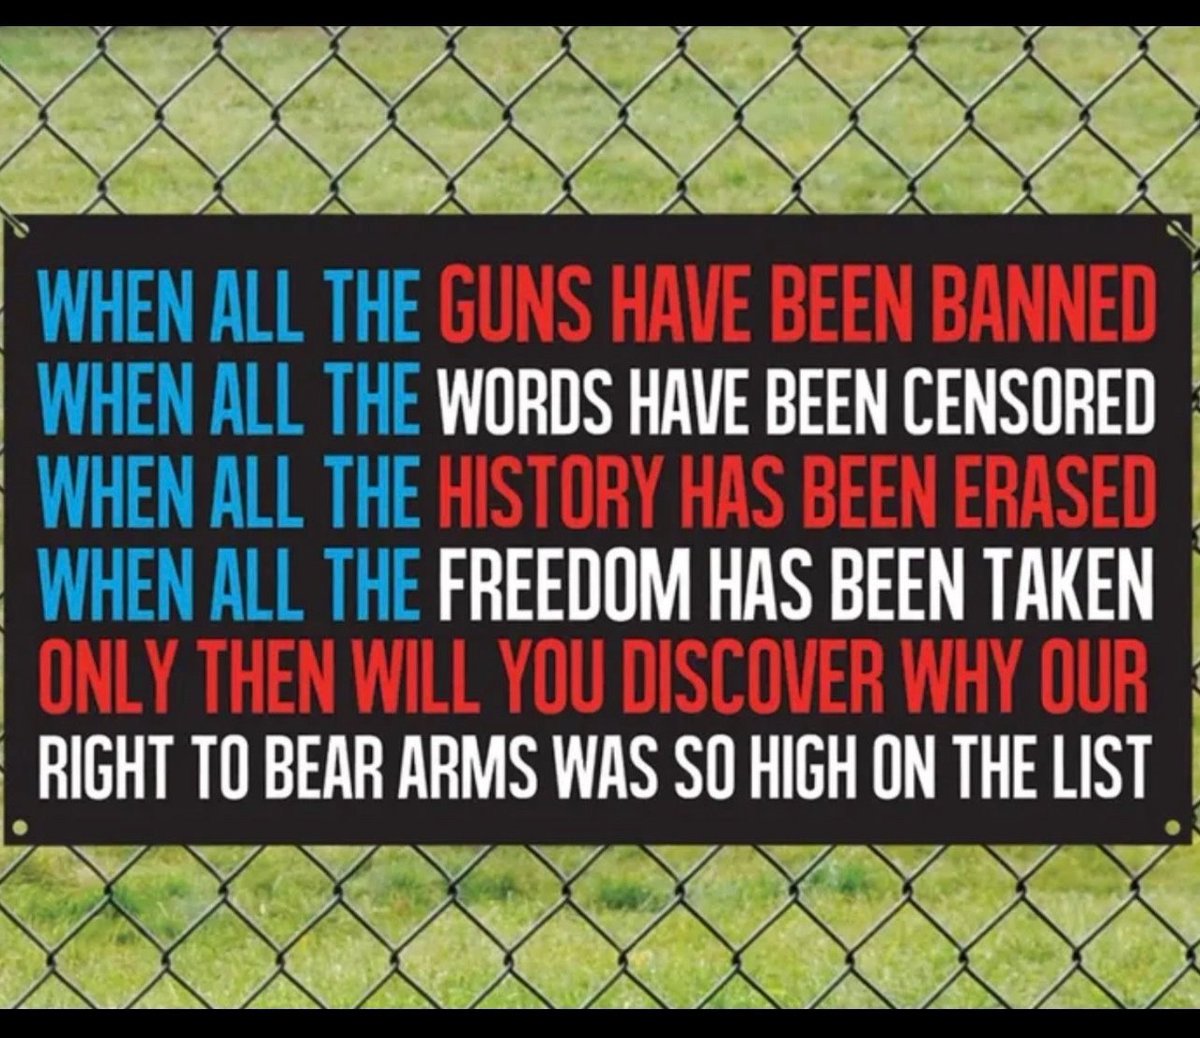 #NRA